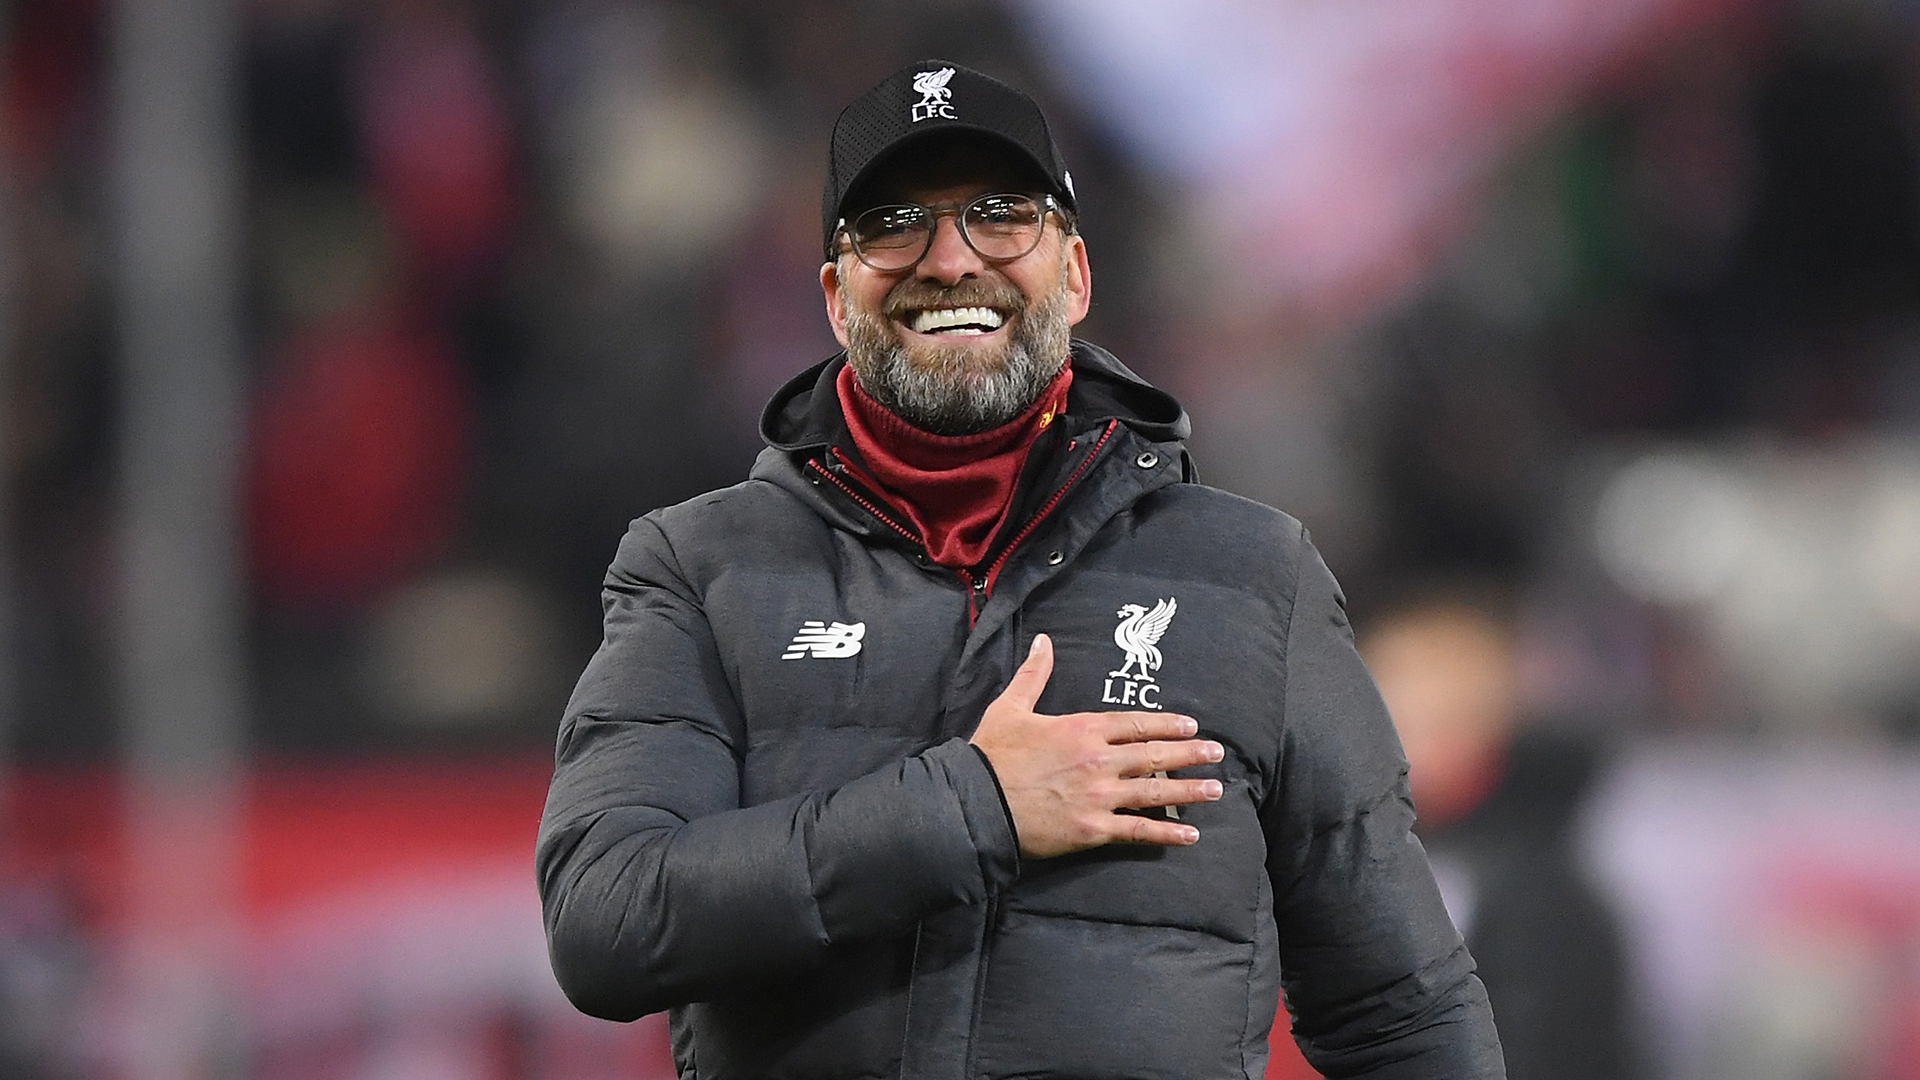 ‘Klopp contract will ensure Liverpool don’t do a Man Utd’ – Fowler expects Reds to avoid Ferguson-esque handover